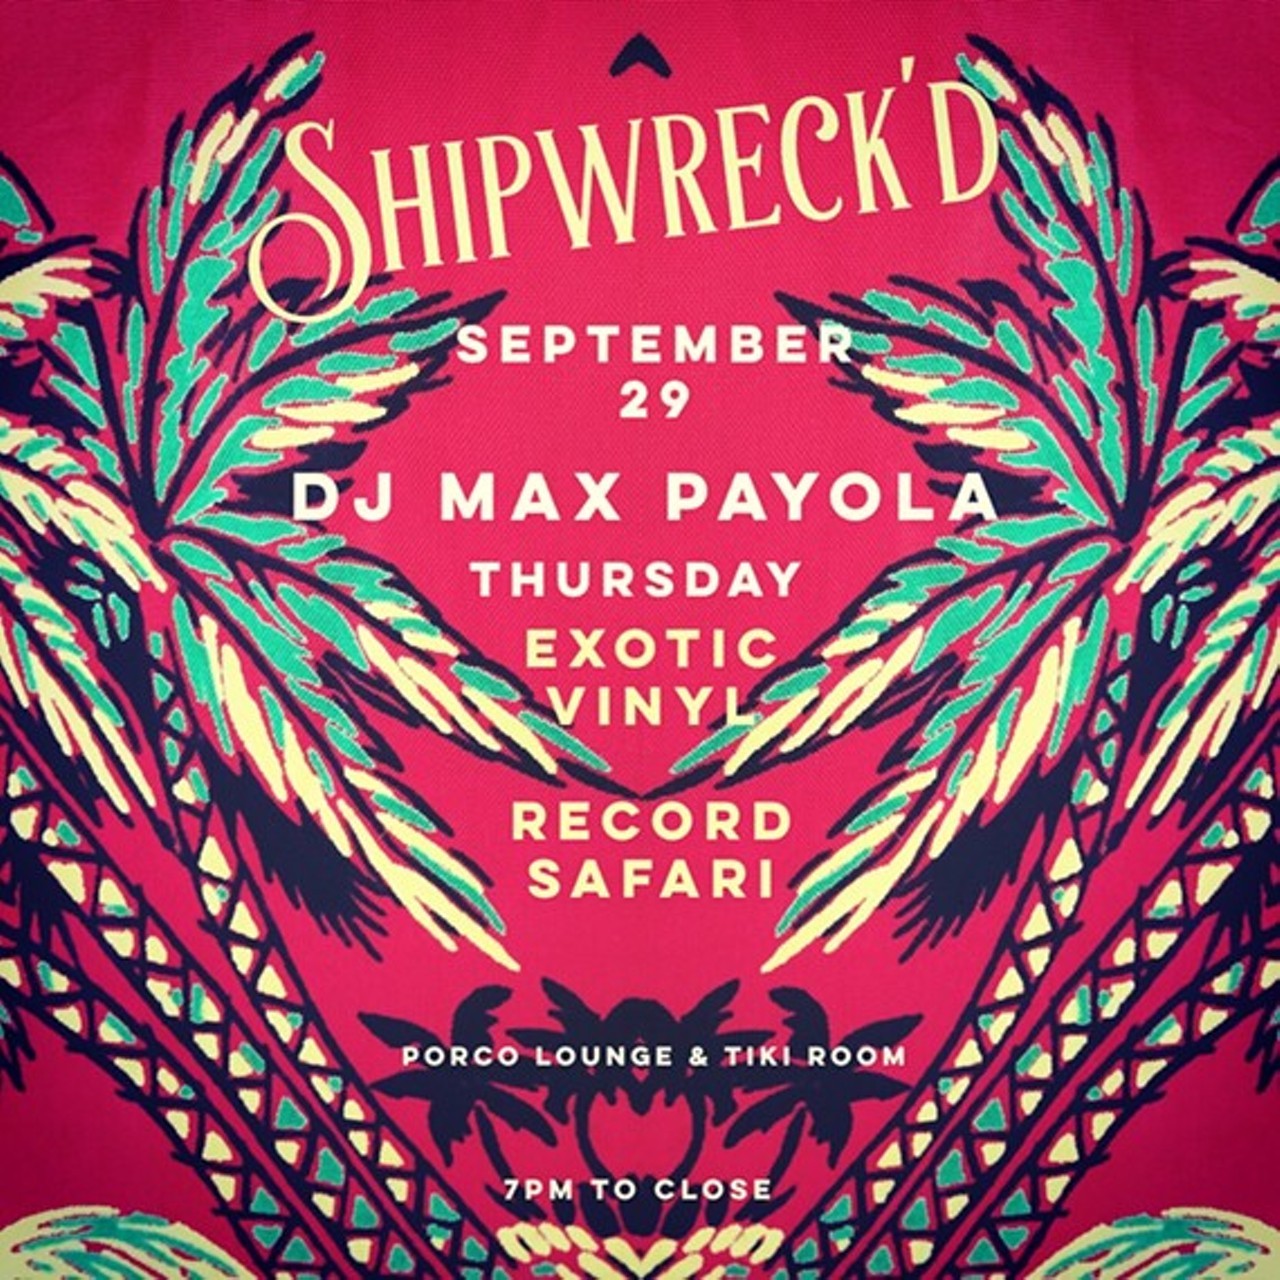 Shipwreck'd! w/ DJ Max Payola 
When: Last Thursday of every month, 7 p.m.-12 a.m. 
Price: free
Last Thursday Of Every Month. DJ Max Payola (of WCSB 89.3fm) spins exotic vinyl all-nite at Porco Lounge & Tiki Room. A night of tiki drinks and rare & unusual exotica 45s and motel lounge LPs. Your only decision should be what to wear; Polynesian or Polyester? or both !?
Porco Lounge & Tiki Room